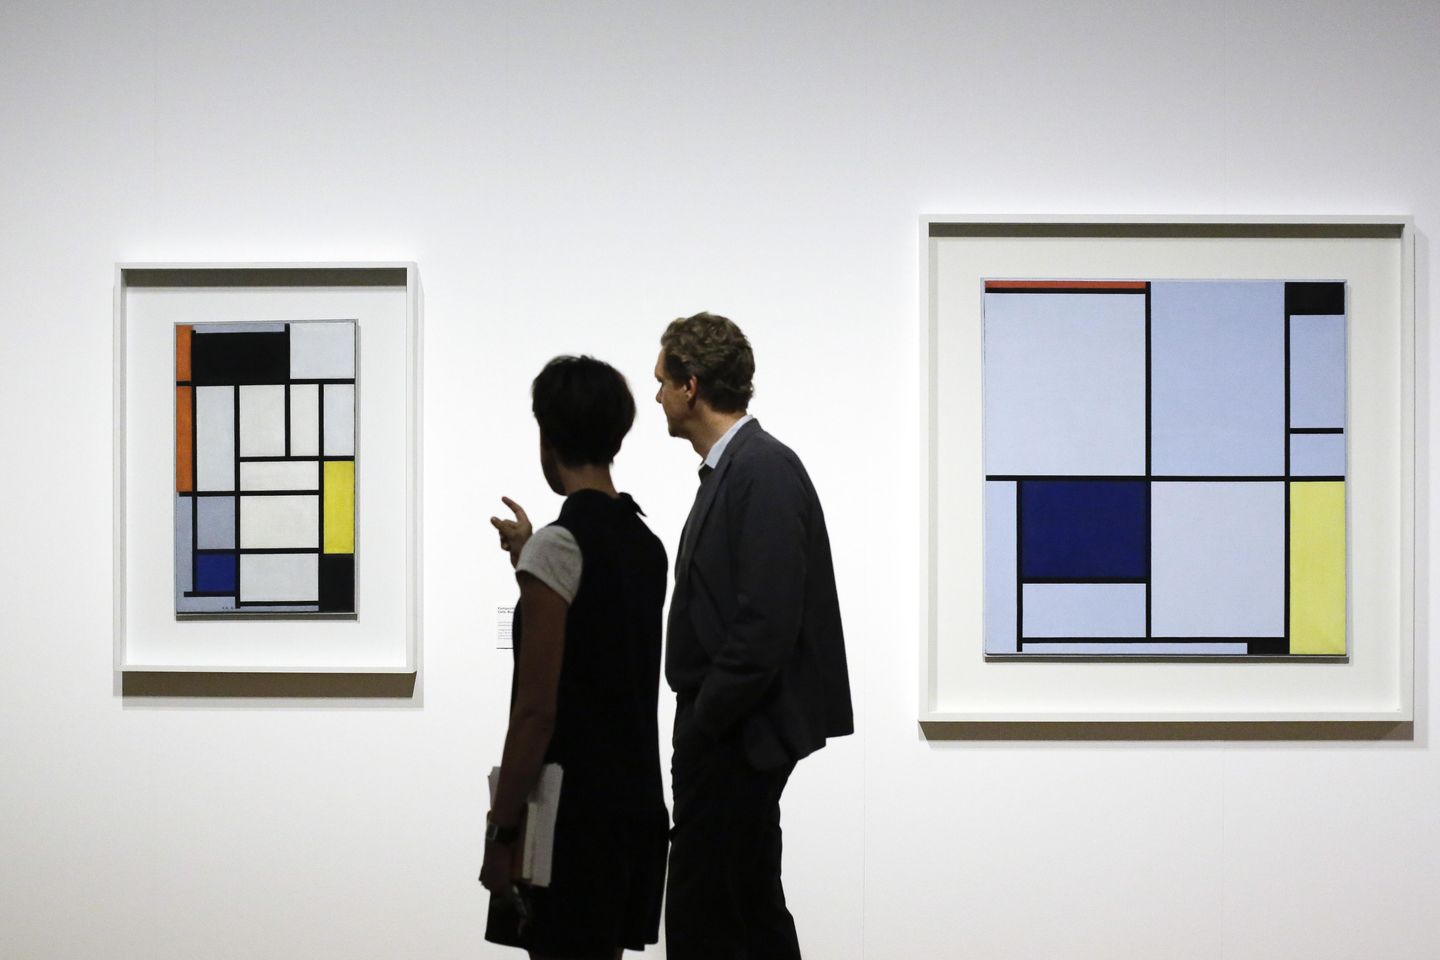 Piet Mondrian painting has been hung in various galleries upside down for 75 years